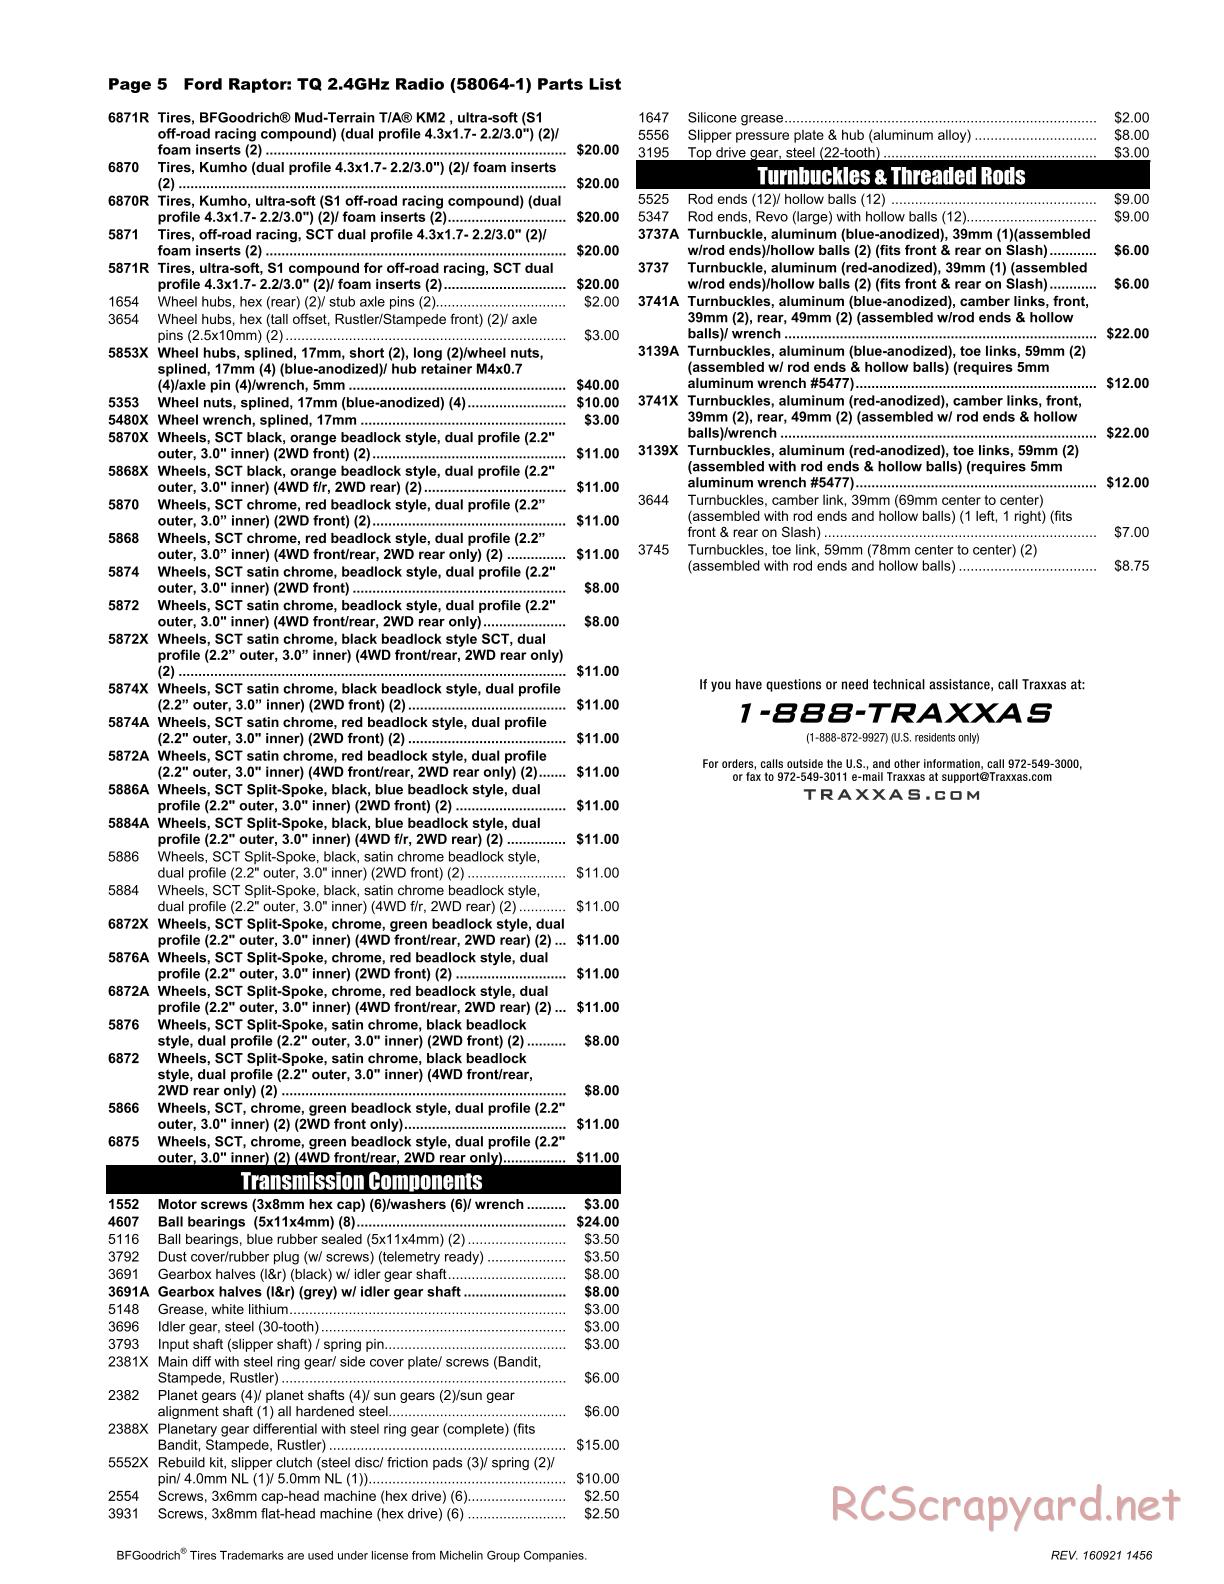 Traxxas - Ford F-150 SVT Raptor (2015) - Parts List - Page 5